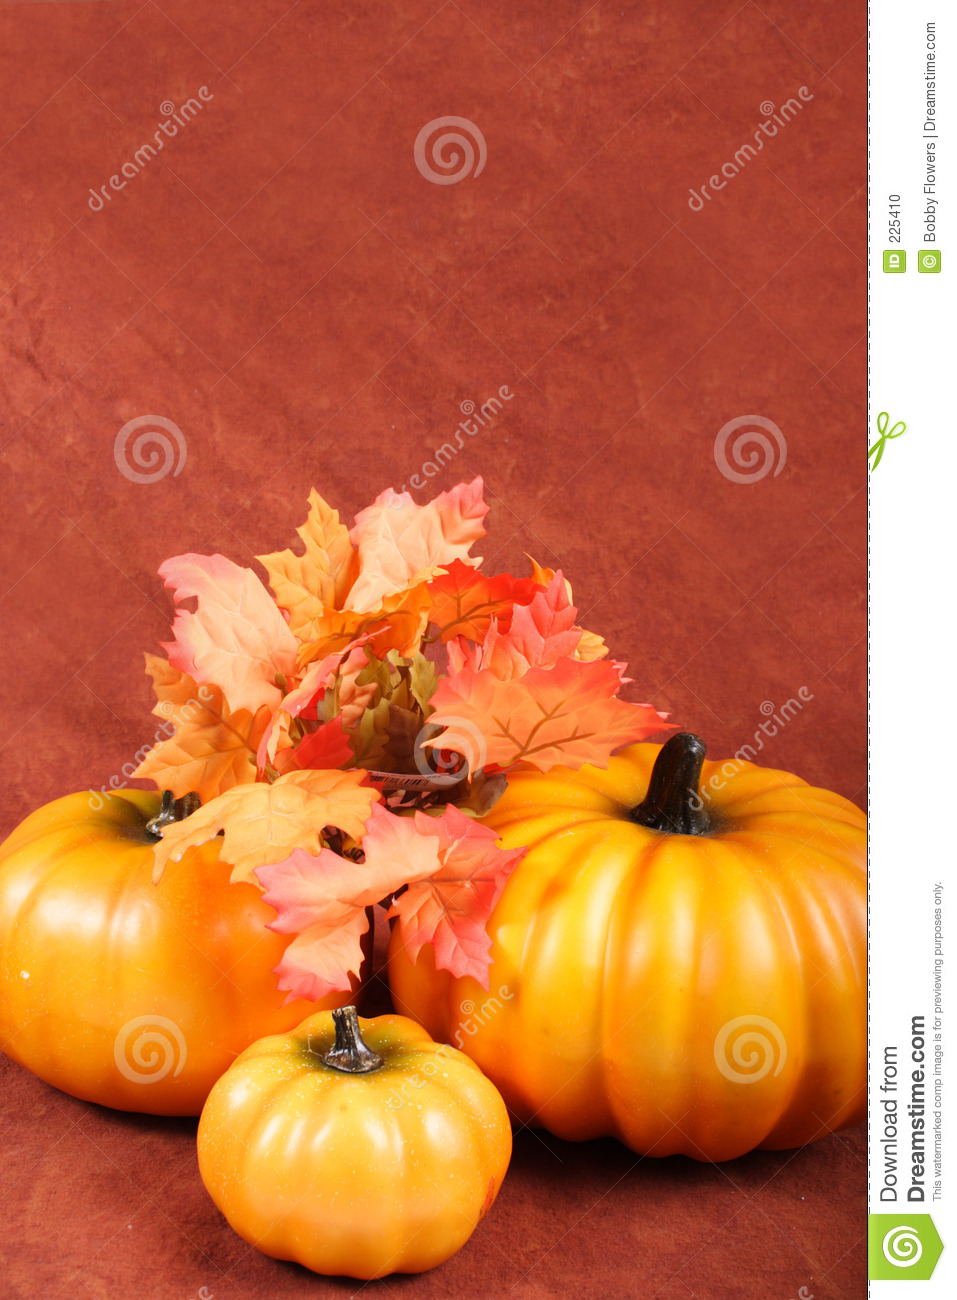 Fall   Thanksgiving Decorations Stock Photo   Image  225410